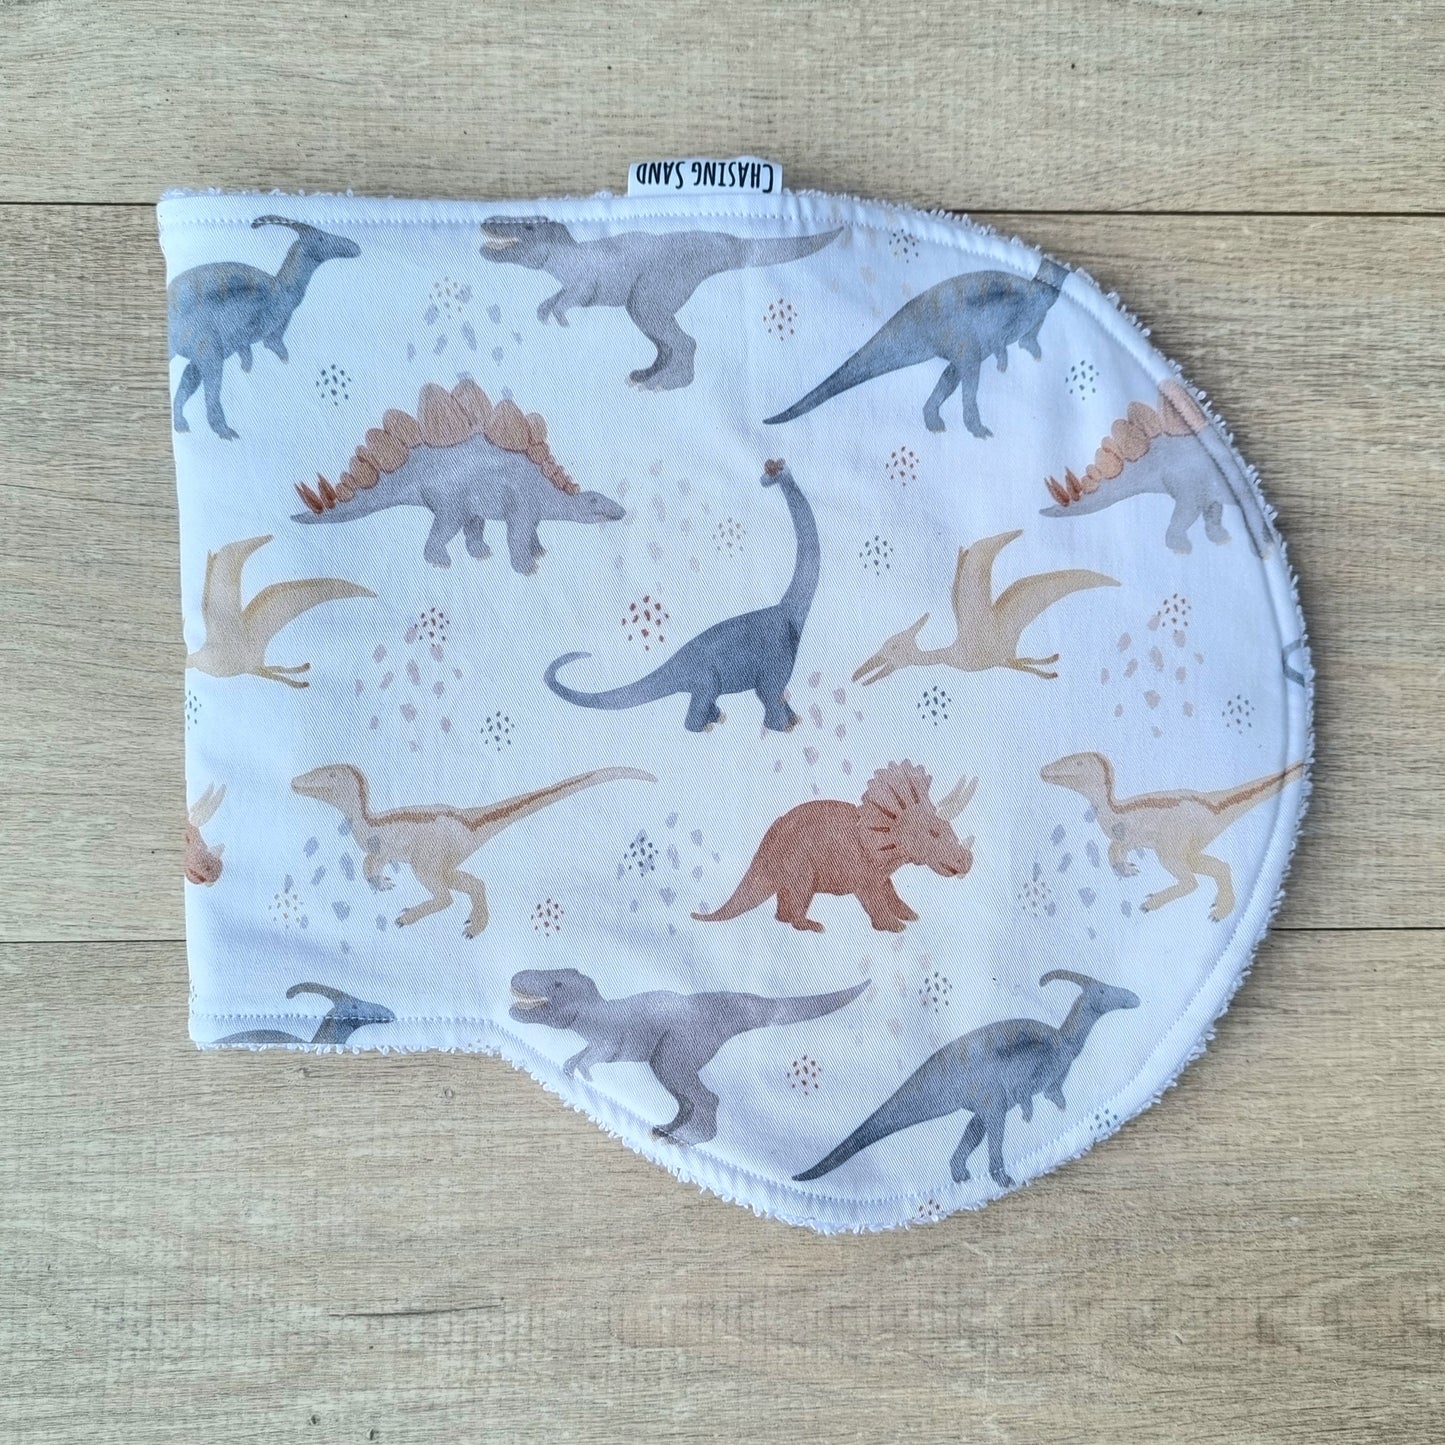 Burp Cloth - Dino against wooden backdrop. Watercolour dinosaur illustrations white background.